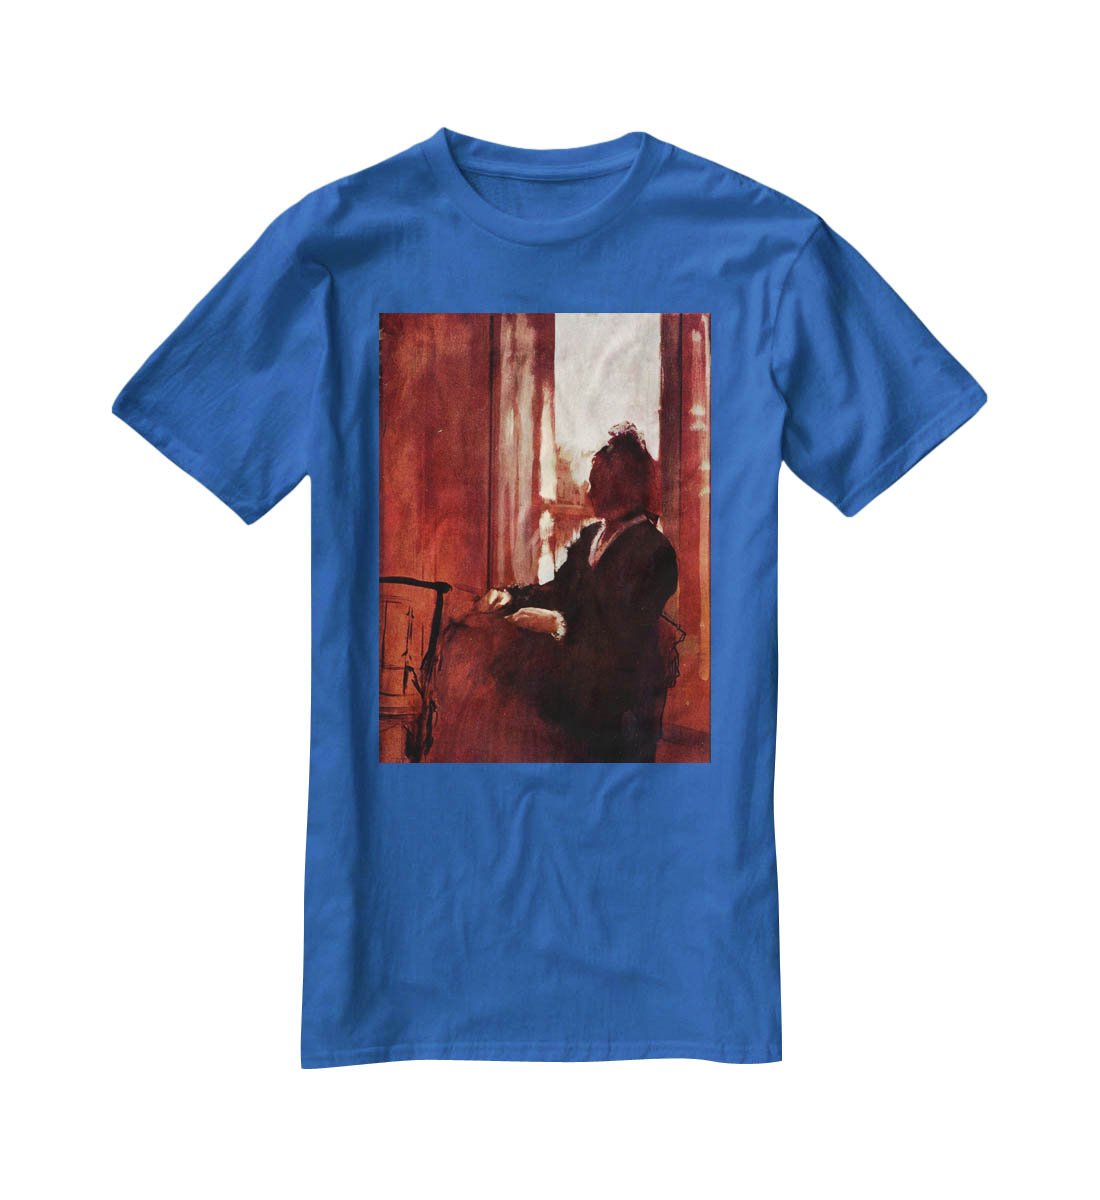 Woman at the window by Degas T-Shirt - Canvas Art Rocks - 2